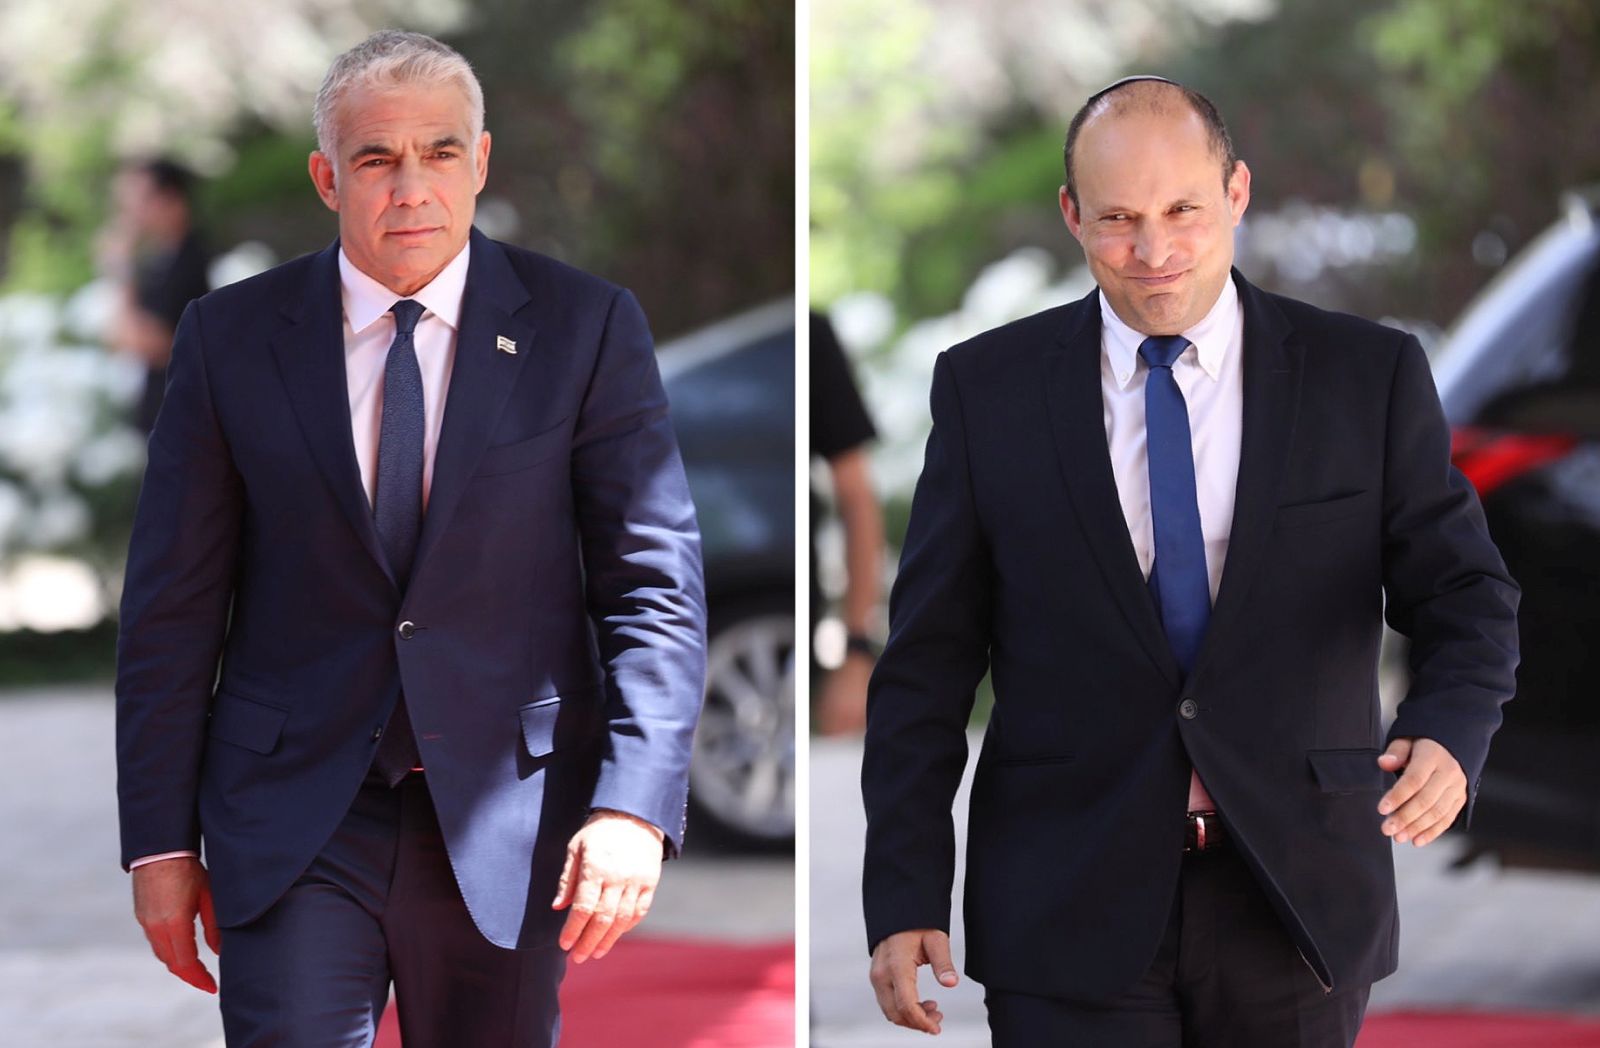 epa09178453 A combination photograph shows the Leader of the Yemina party, Naftali Bennett (R) and leader of the Yessh Atid party, Yair Lapid (L) both entering the residence of President Reuven Rivlin, in Jerusalem, Israel, 05 May 2021. Israeli Prime Minister Benjamin Netanyahu failed to form a government with at least 61 Knesset seats as the deadline issued by the President has ended. The mandate to form a government is expected to pass to the Yesh Atid party and a rotation deal with Naftali Bennett.  EPA/ABIR SULTAN